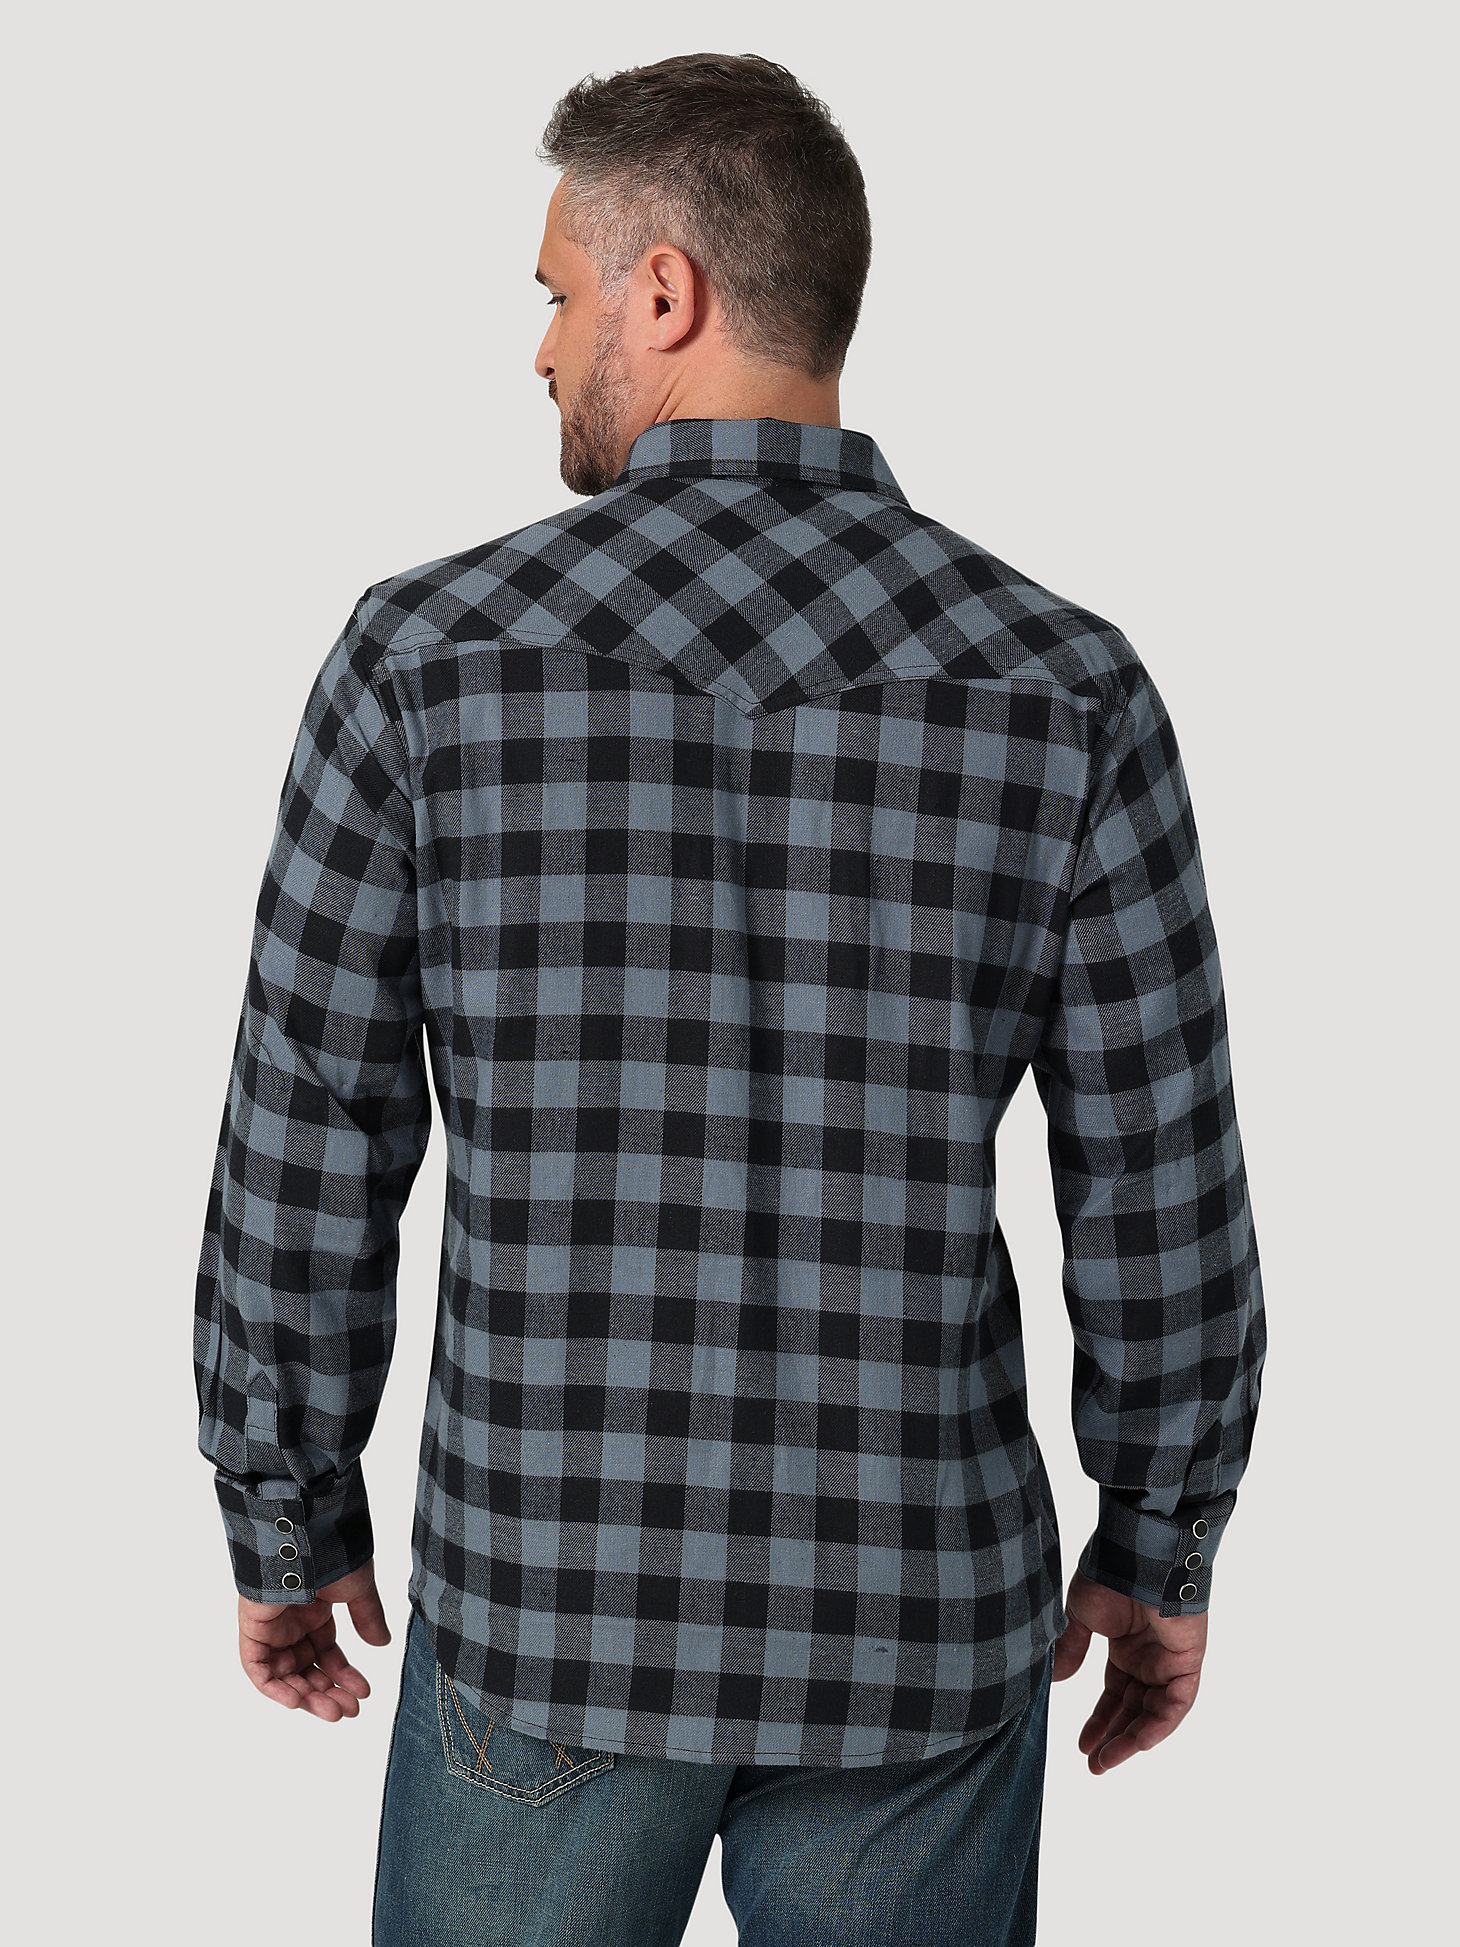 Men's Wrangler Retro® Long Sleeve Flannel Western Snap Plaid Shirt in Stormy Weather alternative view 1